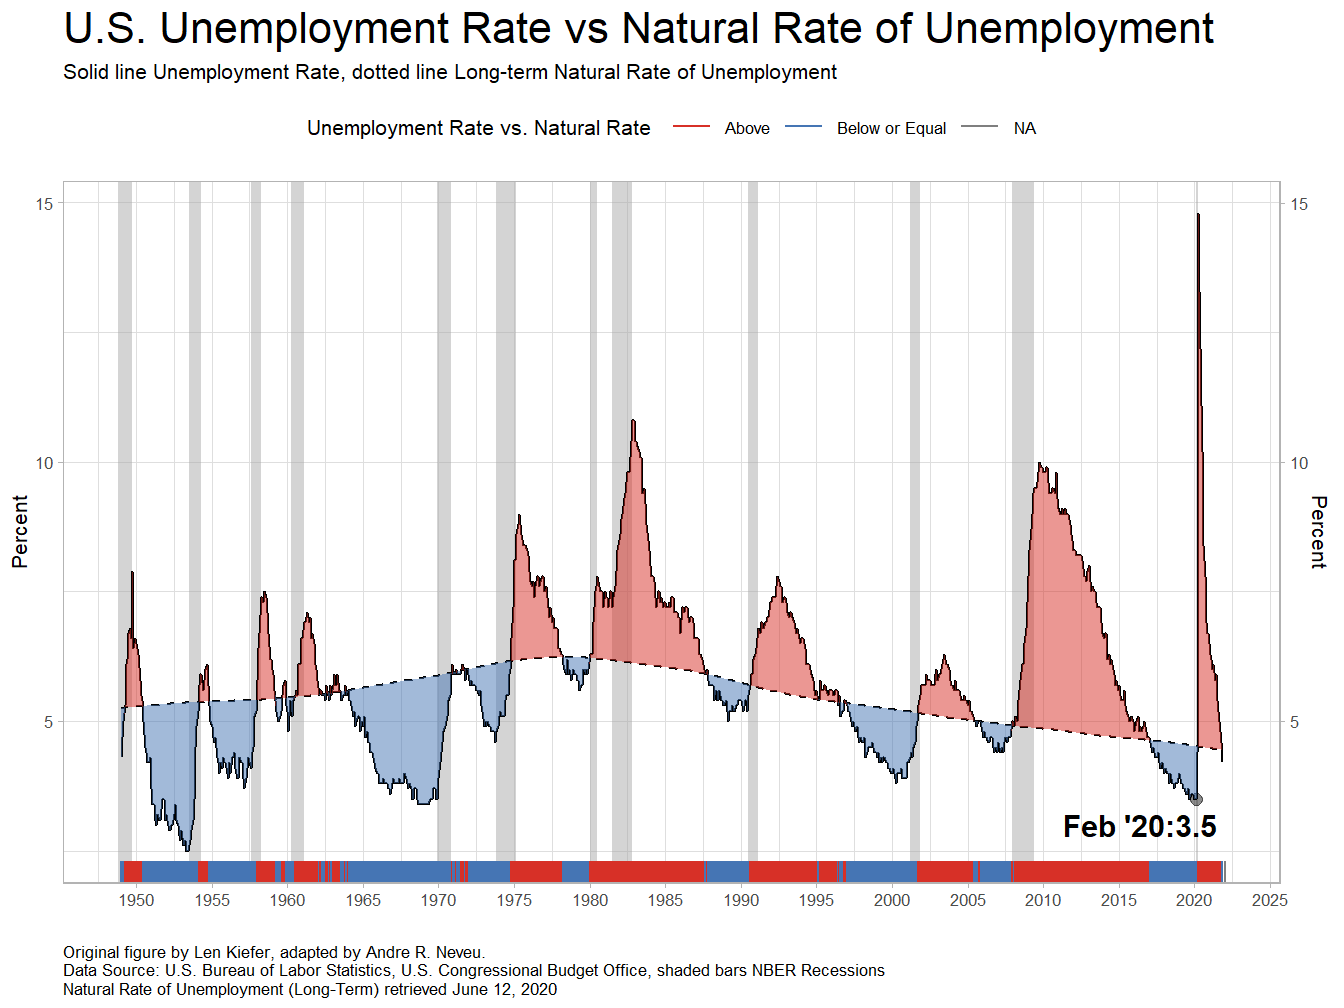 Unemployment Rates Had Been Historically Low